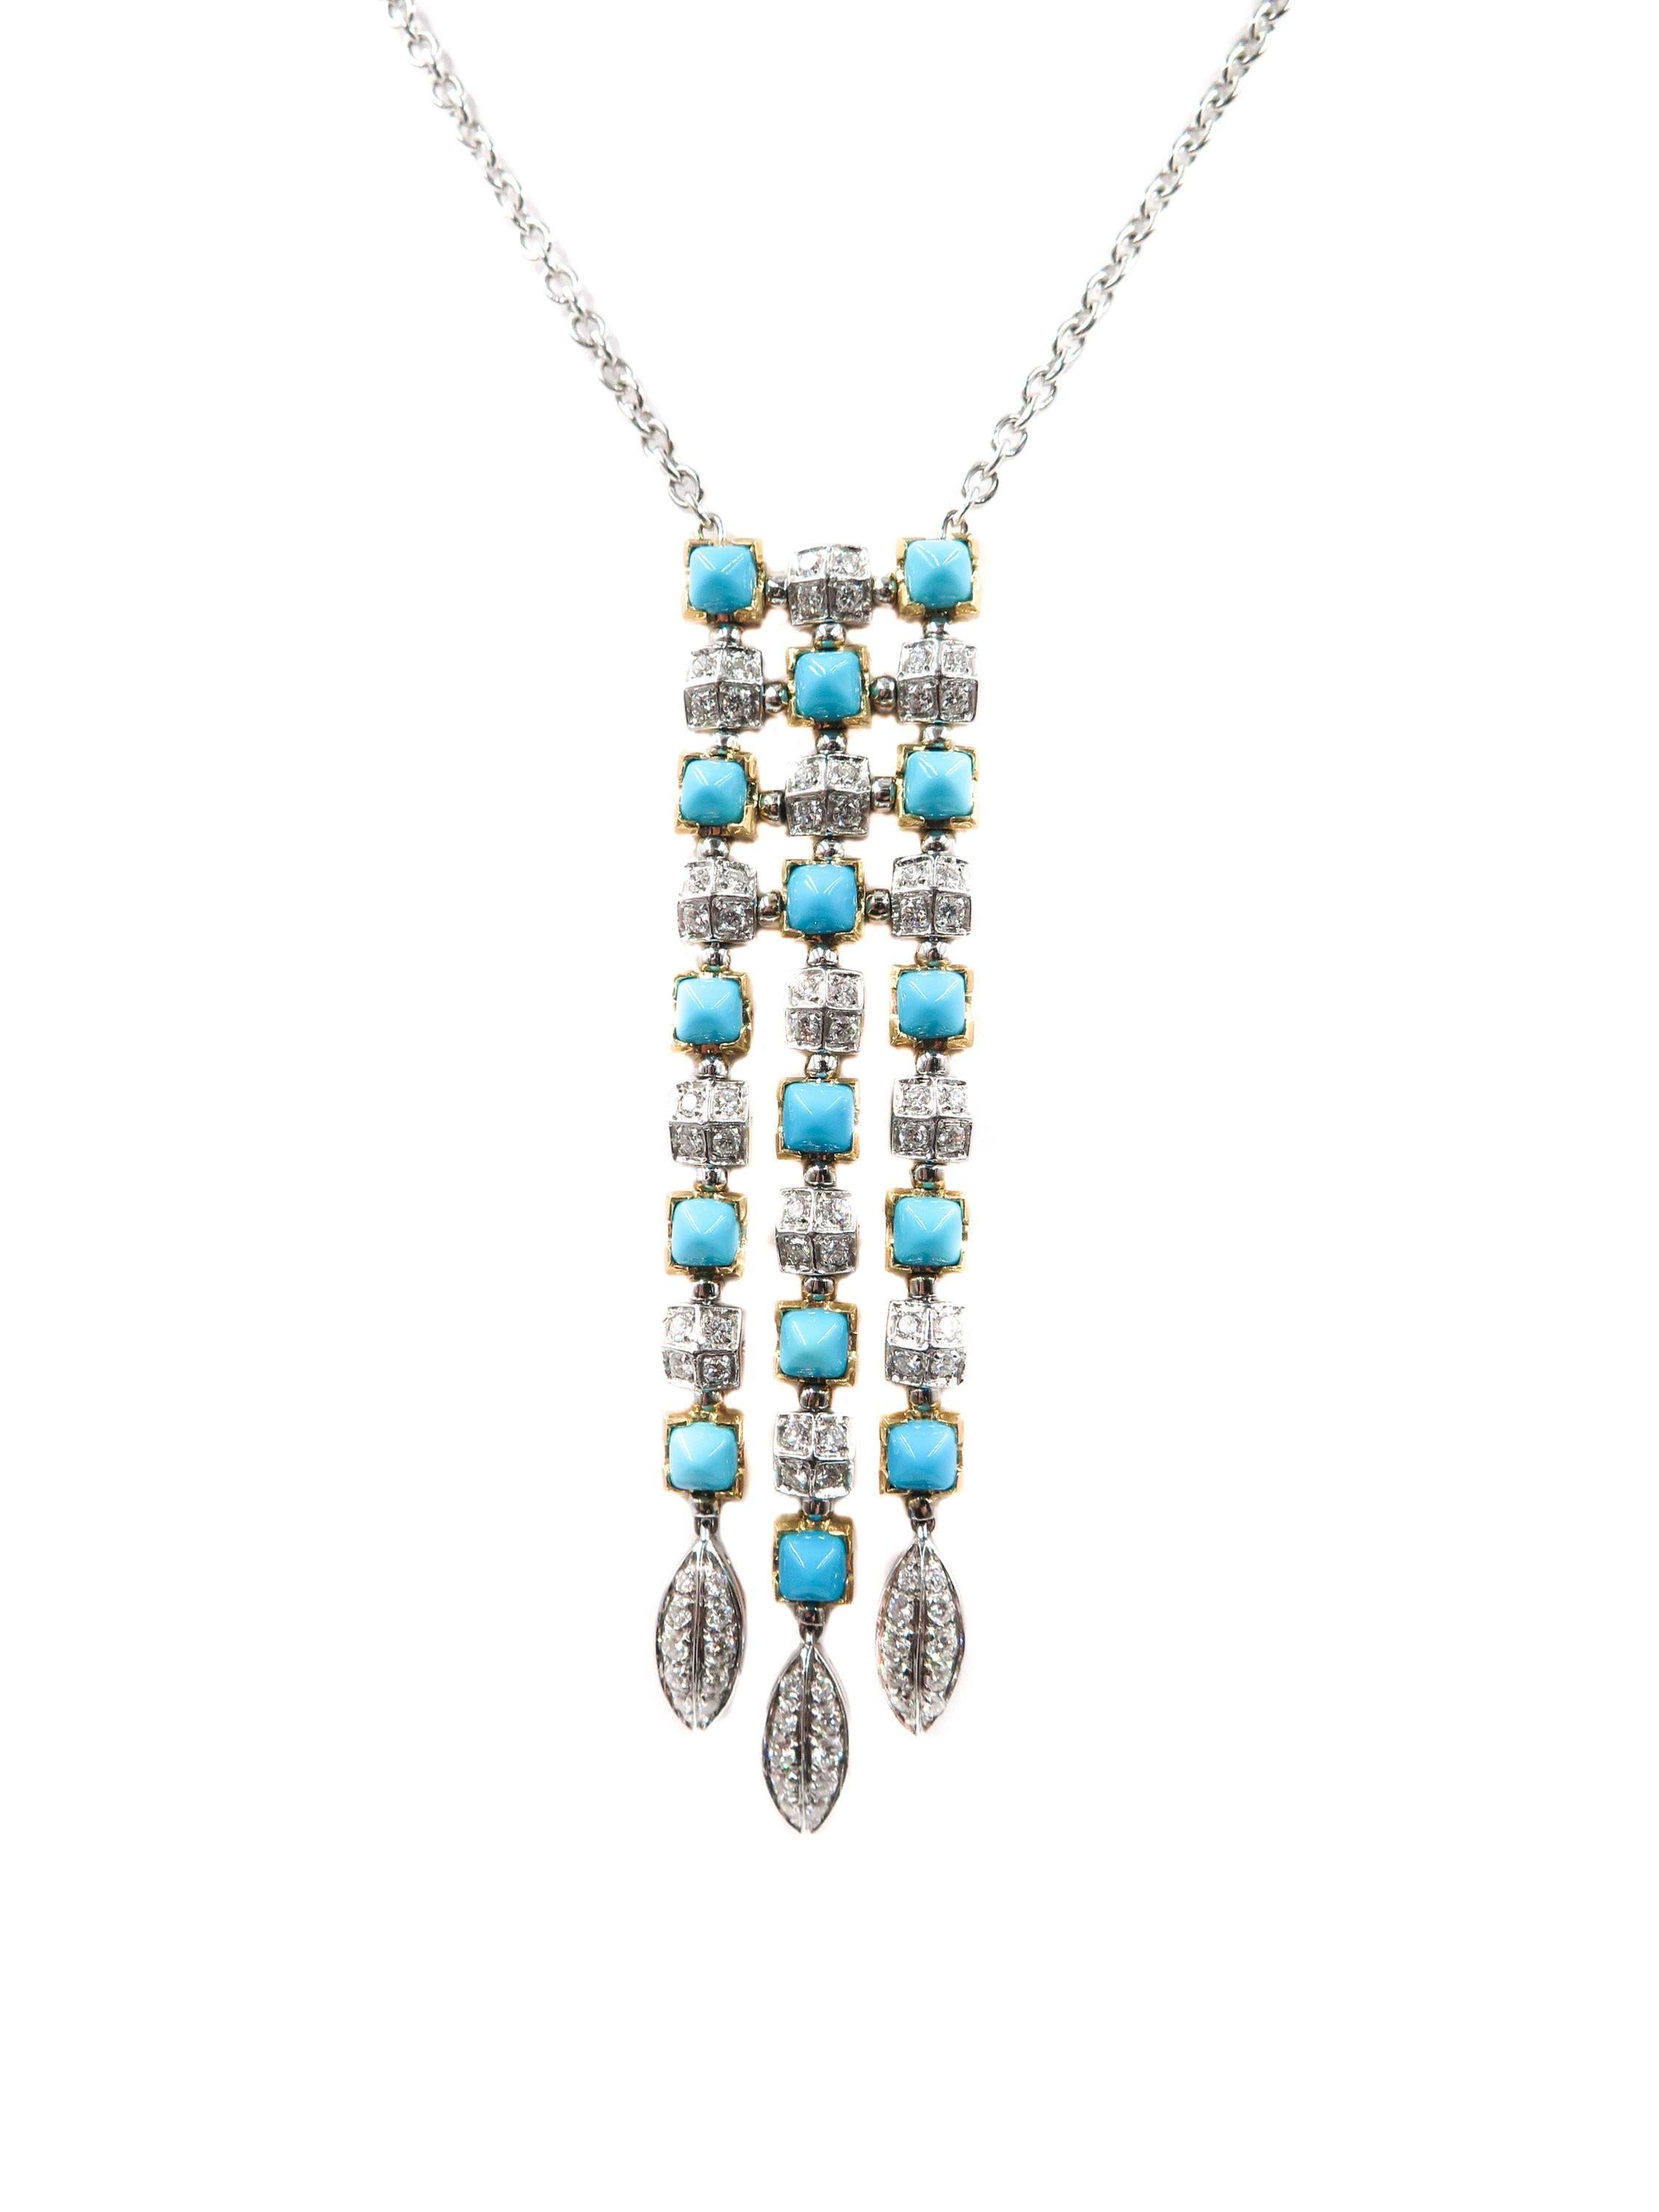 An amazing turquoise necklace accented by pave-set round diamonds lending contrast to the refreshing color of this fashionable estate necklace. Crafted in 18k yellow and white gold, the pendant portion of the necklace suspends from an adjustable 16-